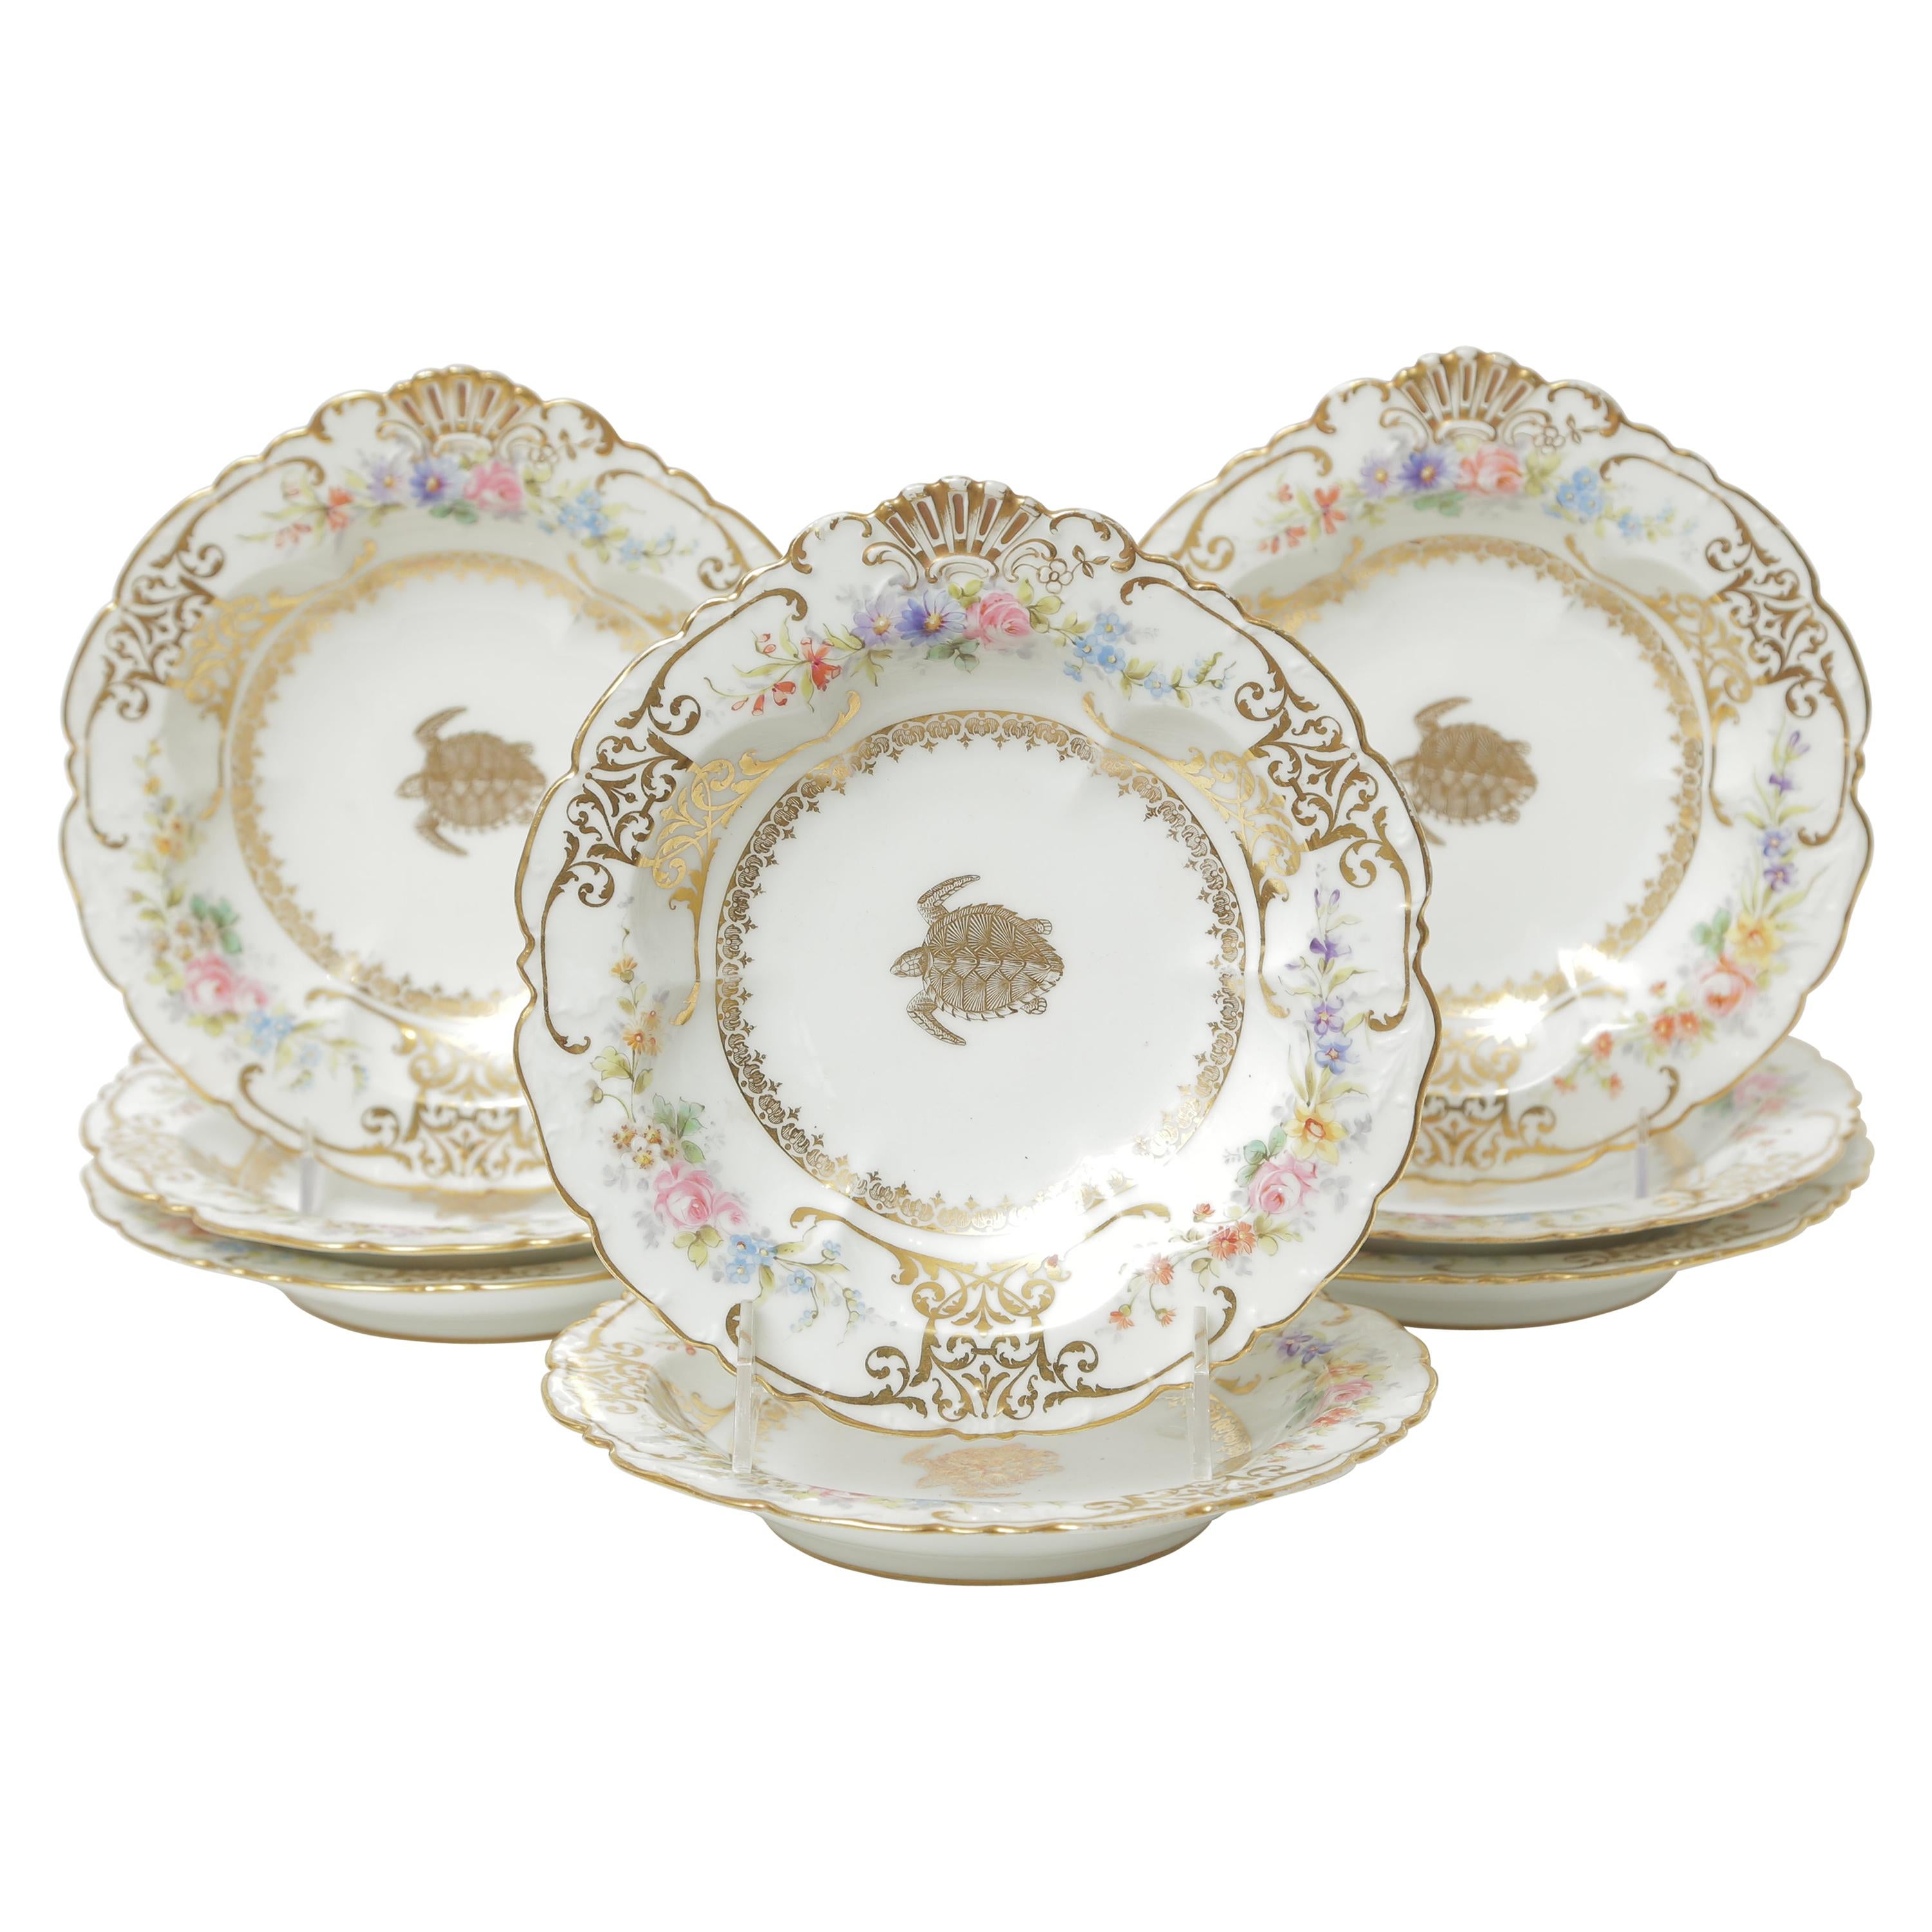 8 Turtle Soup Bowls, Antique Limoges, Rare and Whimsical, circa 1890